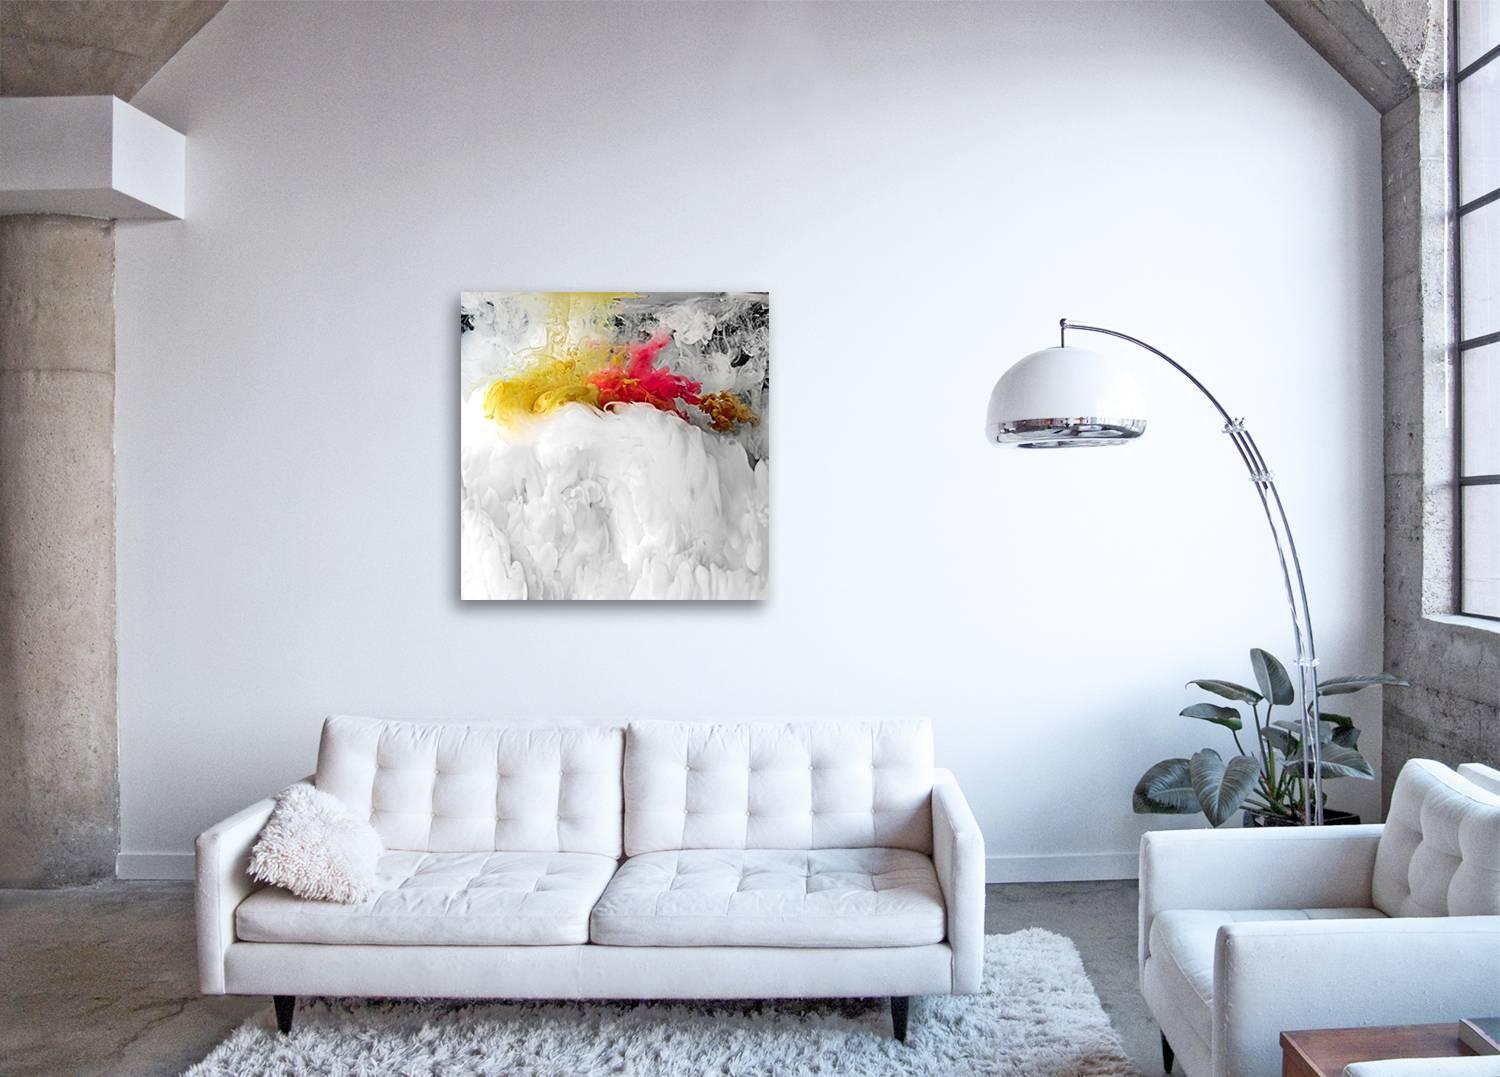 Flow I (framed) -large scale photograph of abstract liquid water cloudscapes - Contemporary Photograph by Christian Stoll